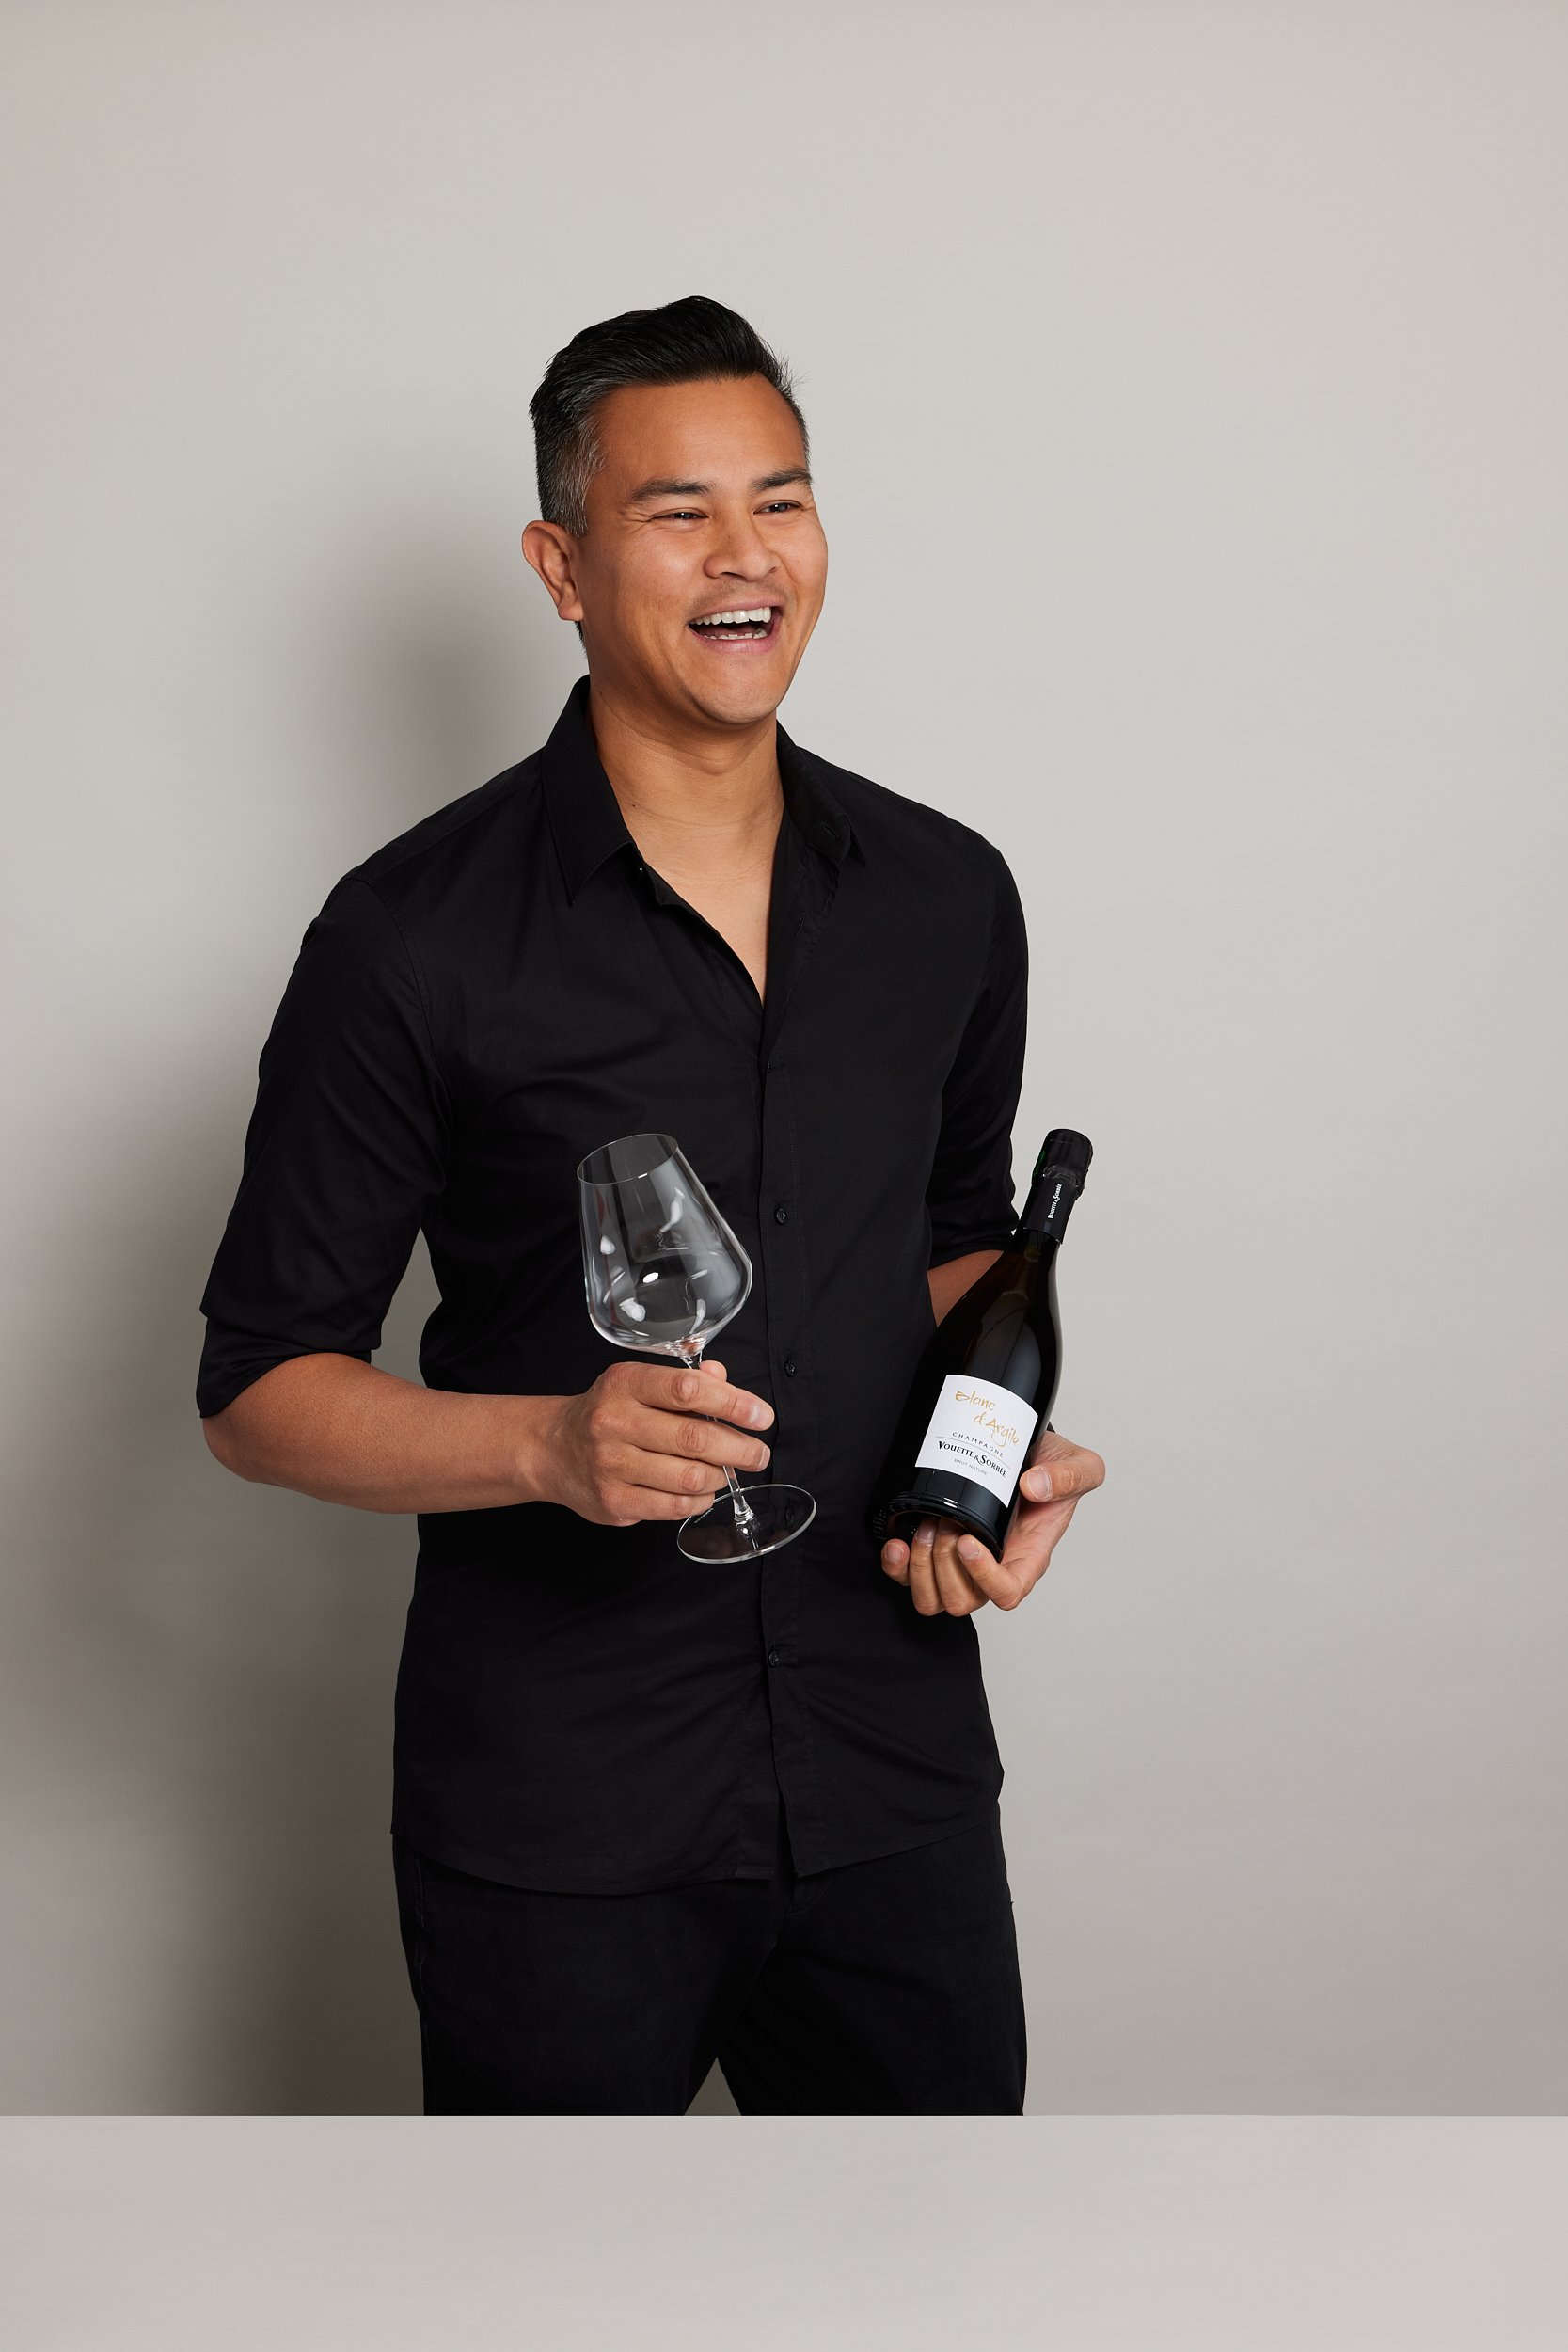 James Dossan of Curated Grapes holding a wine bottle and wine glass laughing off camera with photography by Sarah Anderson Photography.jpg